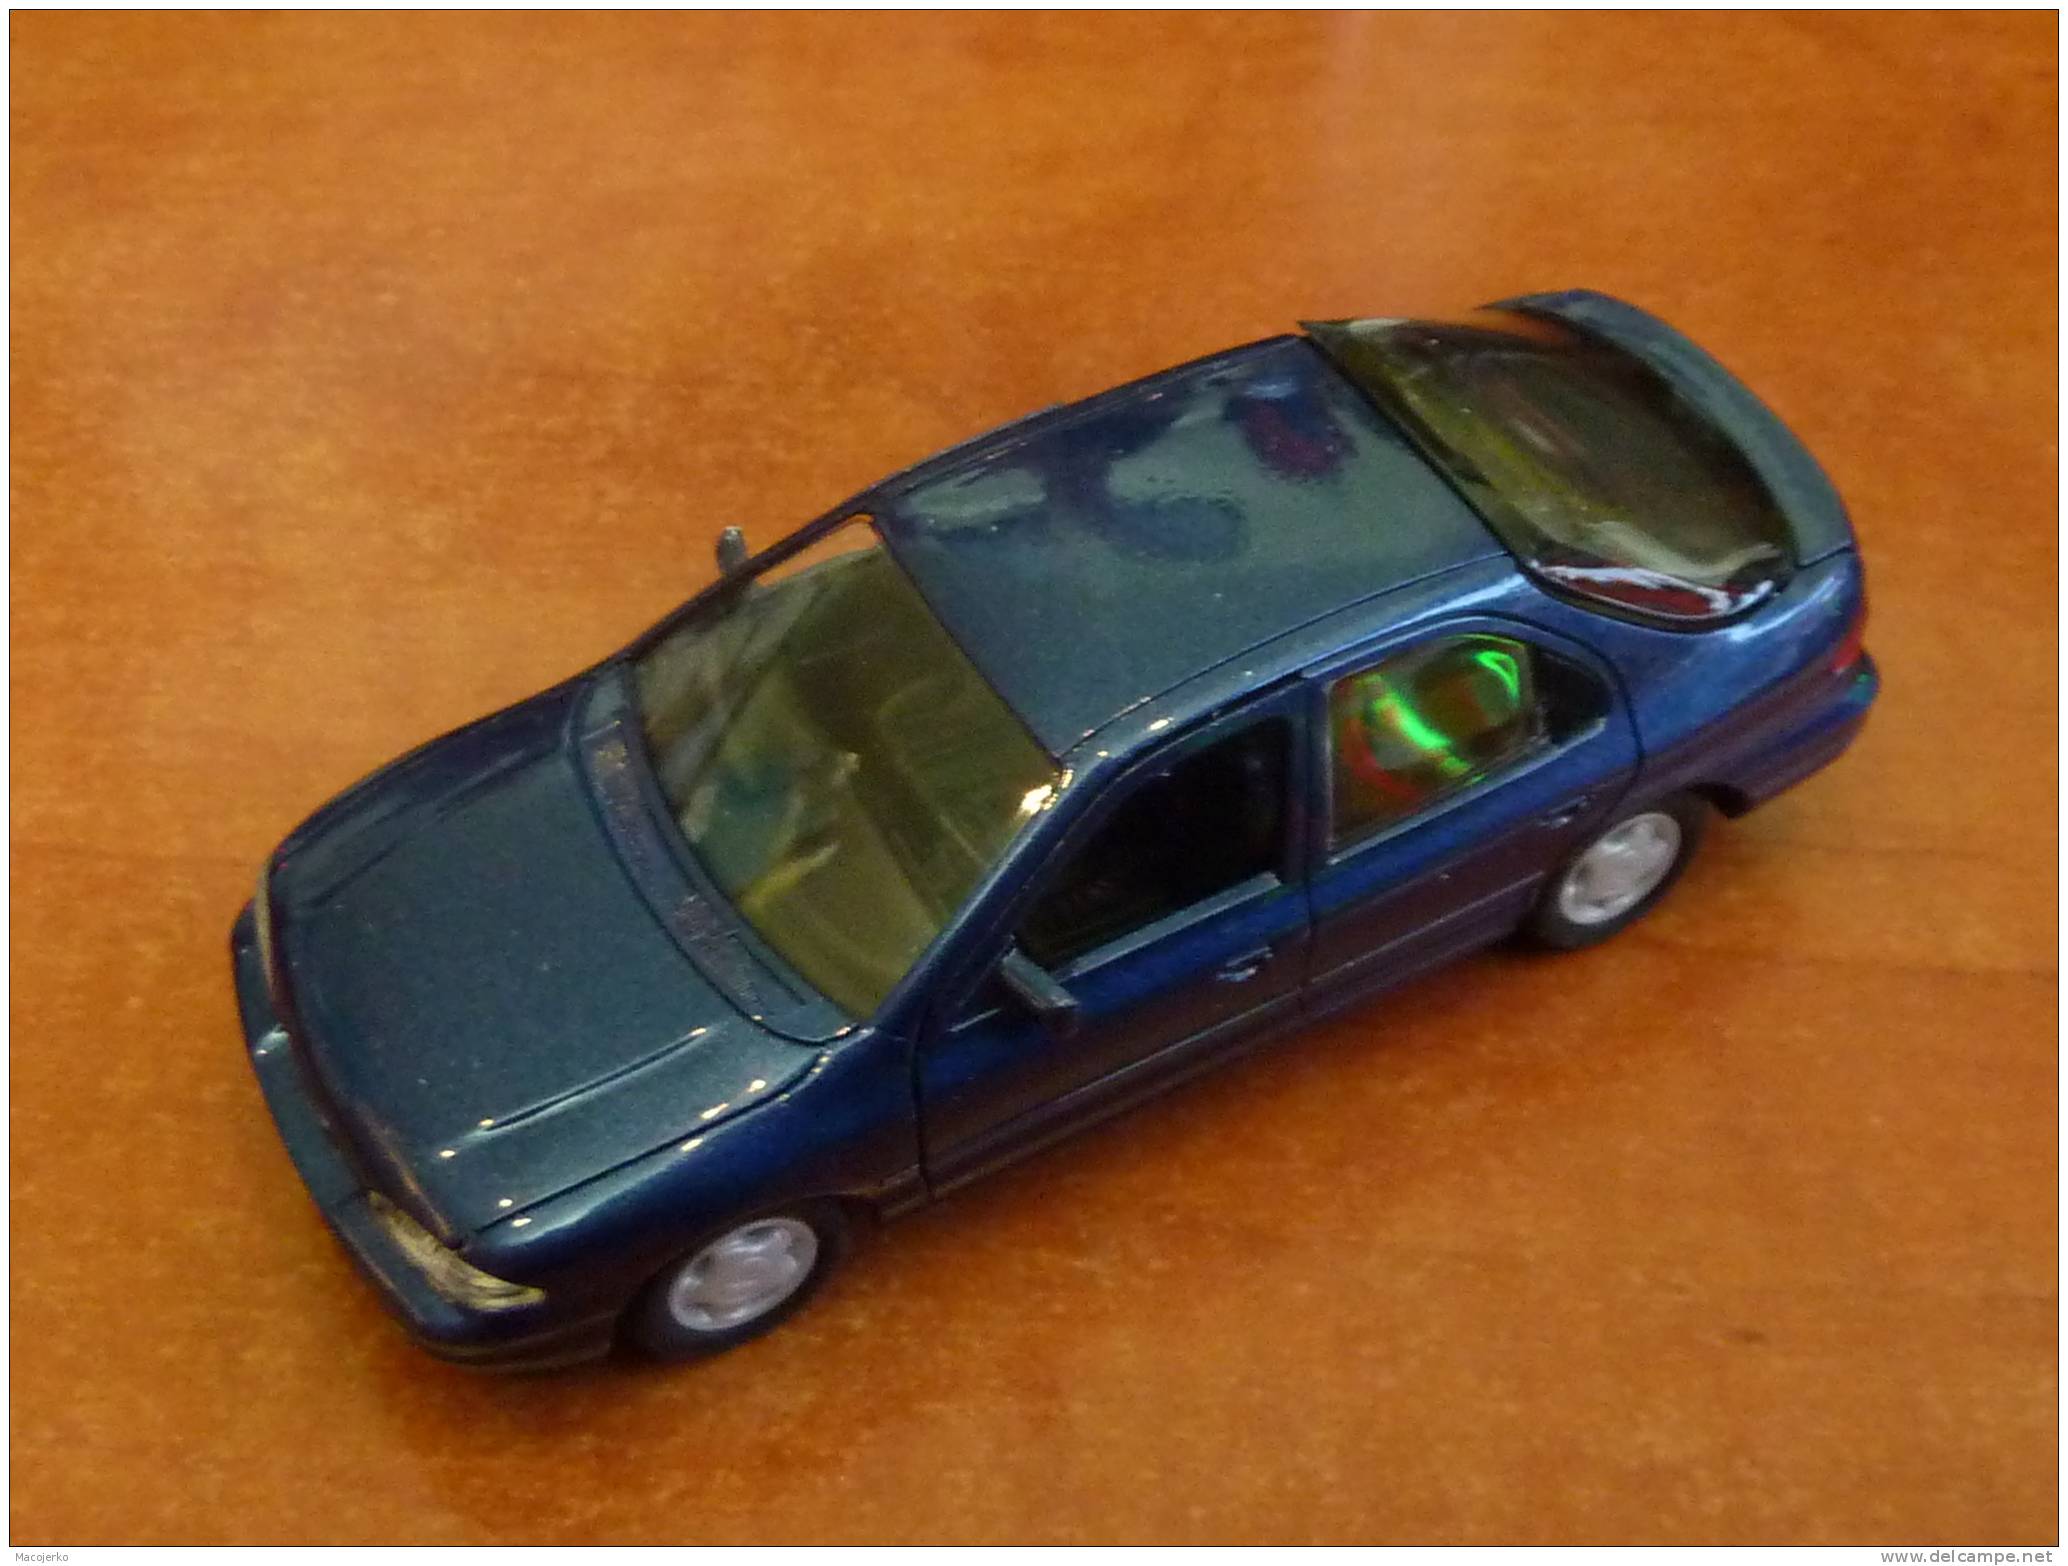 Ford (Gama) 51020, Ford Mondeo, 1:43 - Gama